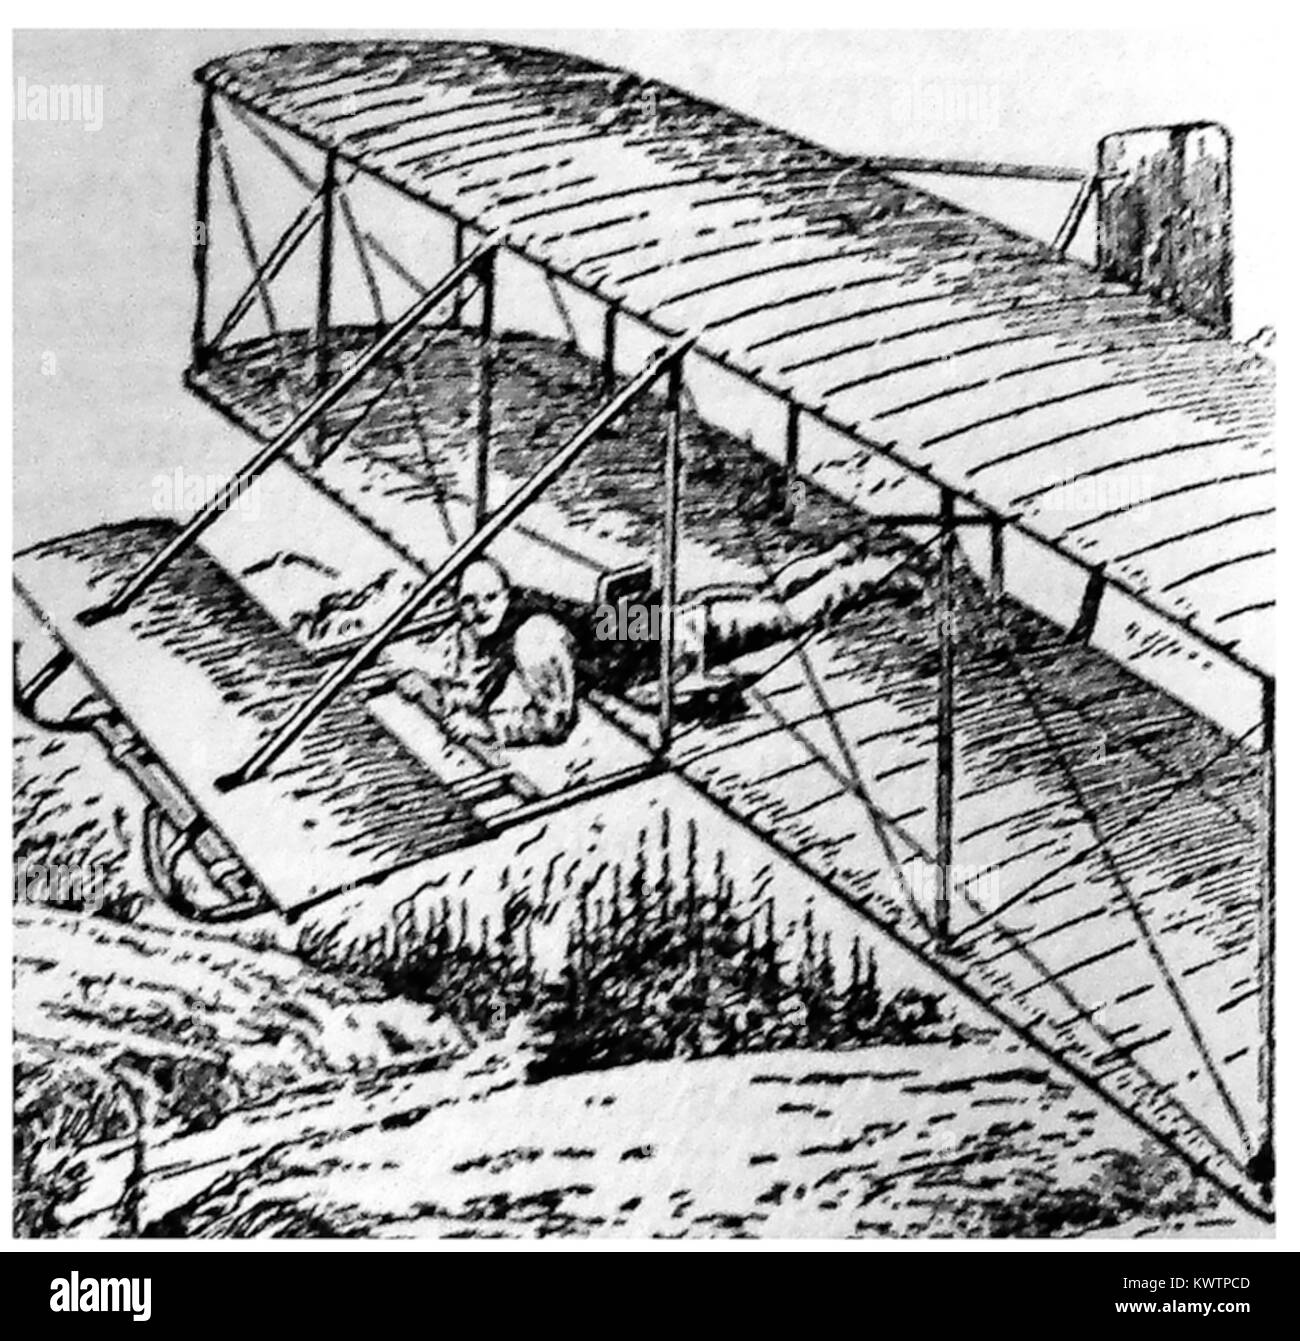 A 1933 illustration showing a 1903 Wright brothers  biplane glider aeroplane  with 'front mounted  elevator'  and its pilot in flight in a cradle. Stock Photo